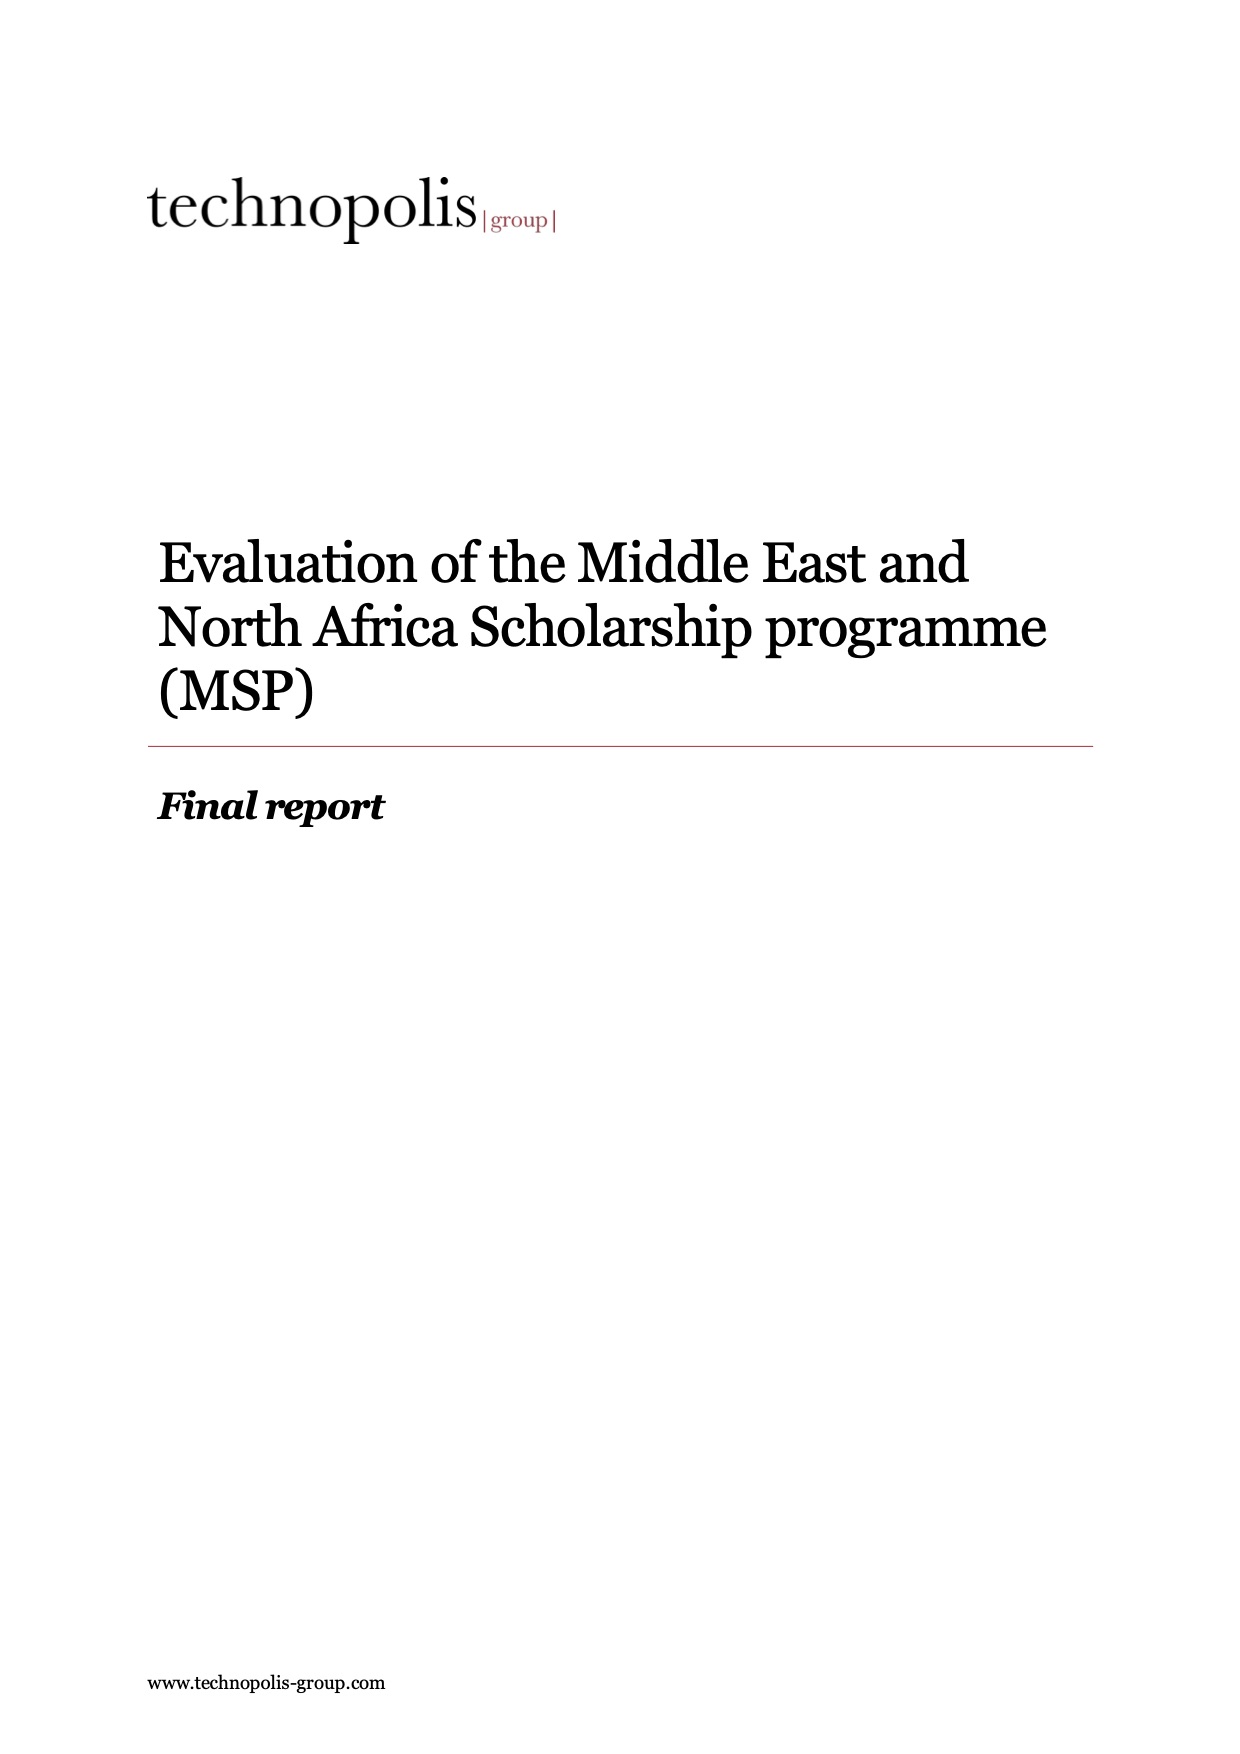 Evaluation of the “Middle East and North Africa Scholarship programme”